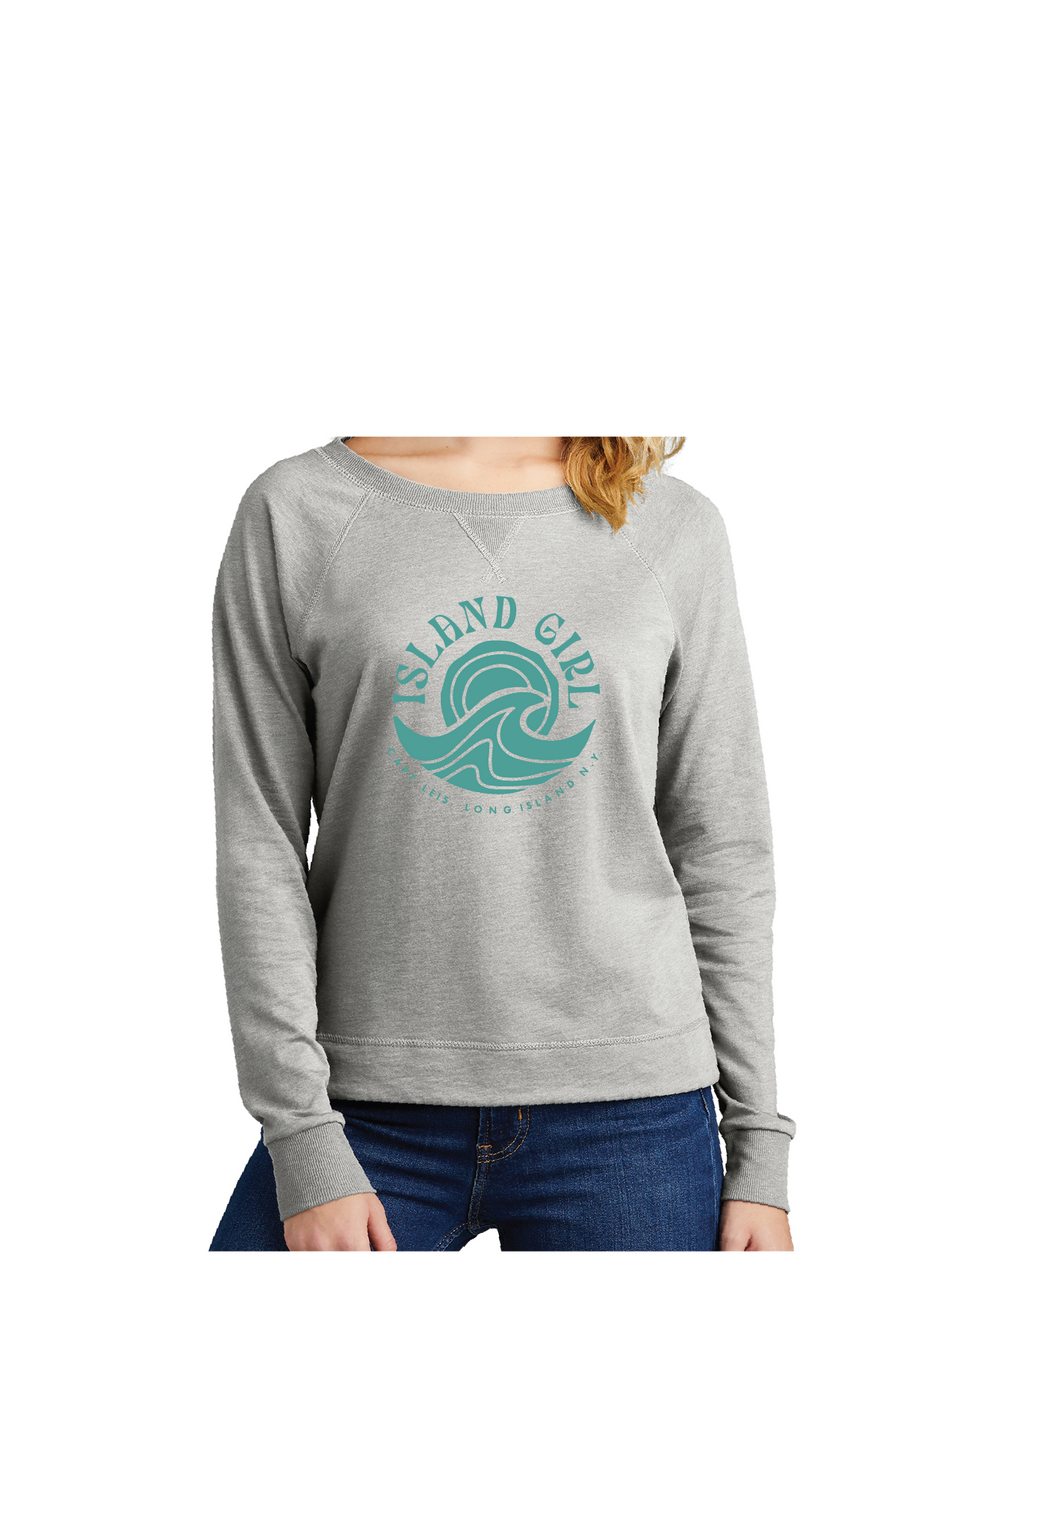 SALE: Island Girl Ladies French Terry Long Sleeve - Gray